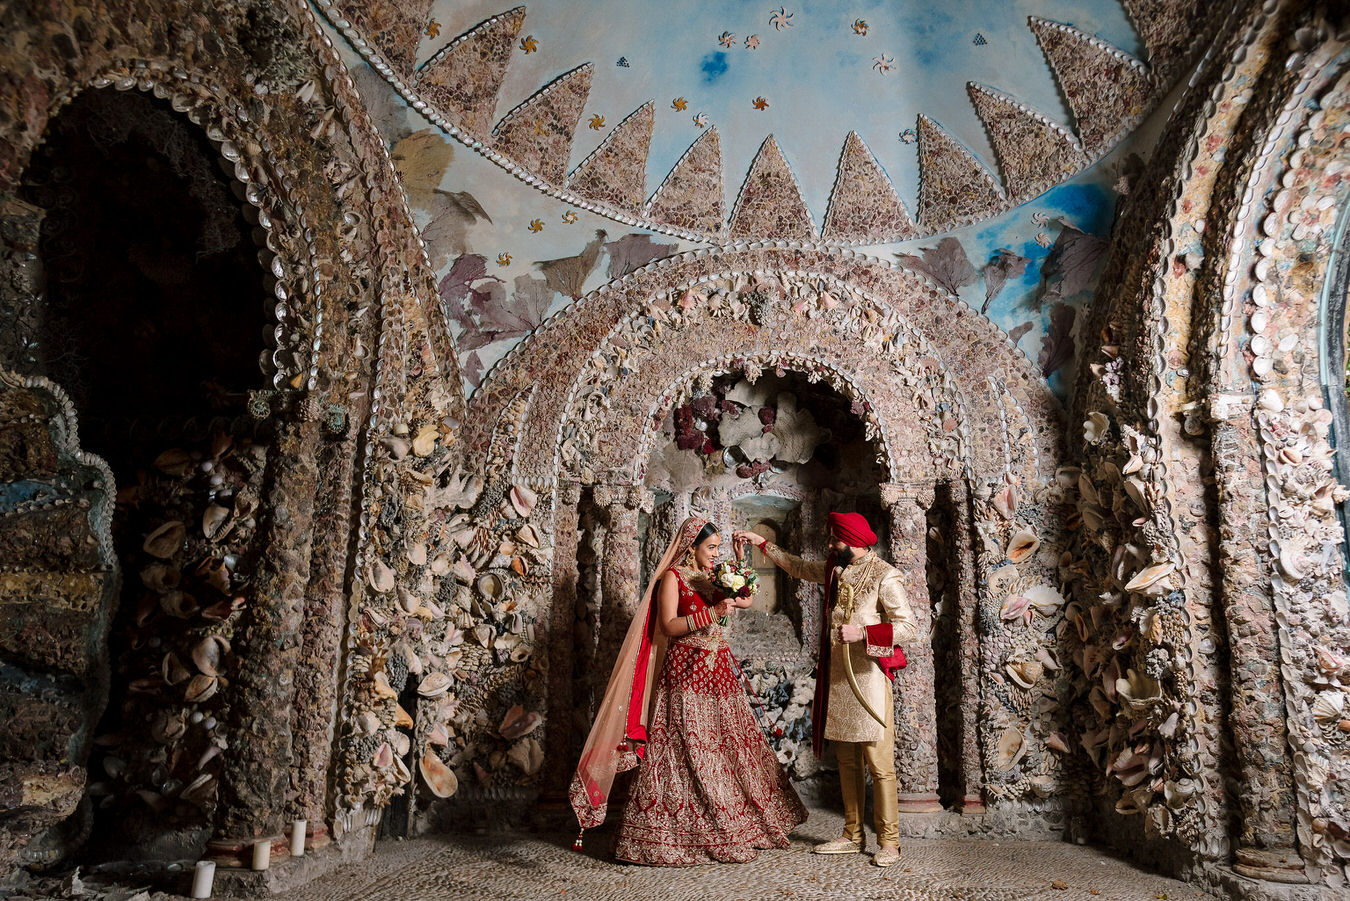 Sikh Asian wedding groom with his kirpan in hand and a bride with a bouquet are dancing inside the shell grotto